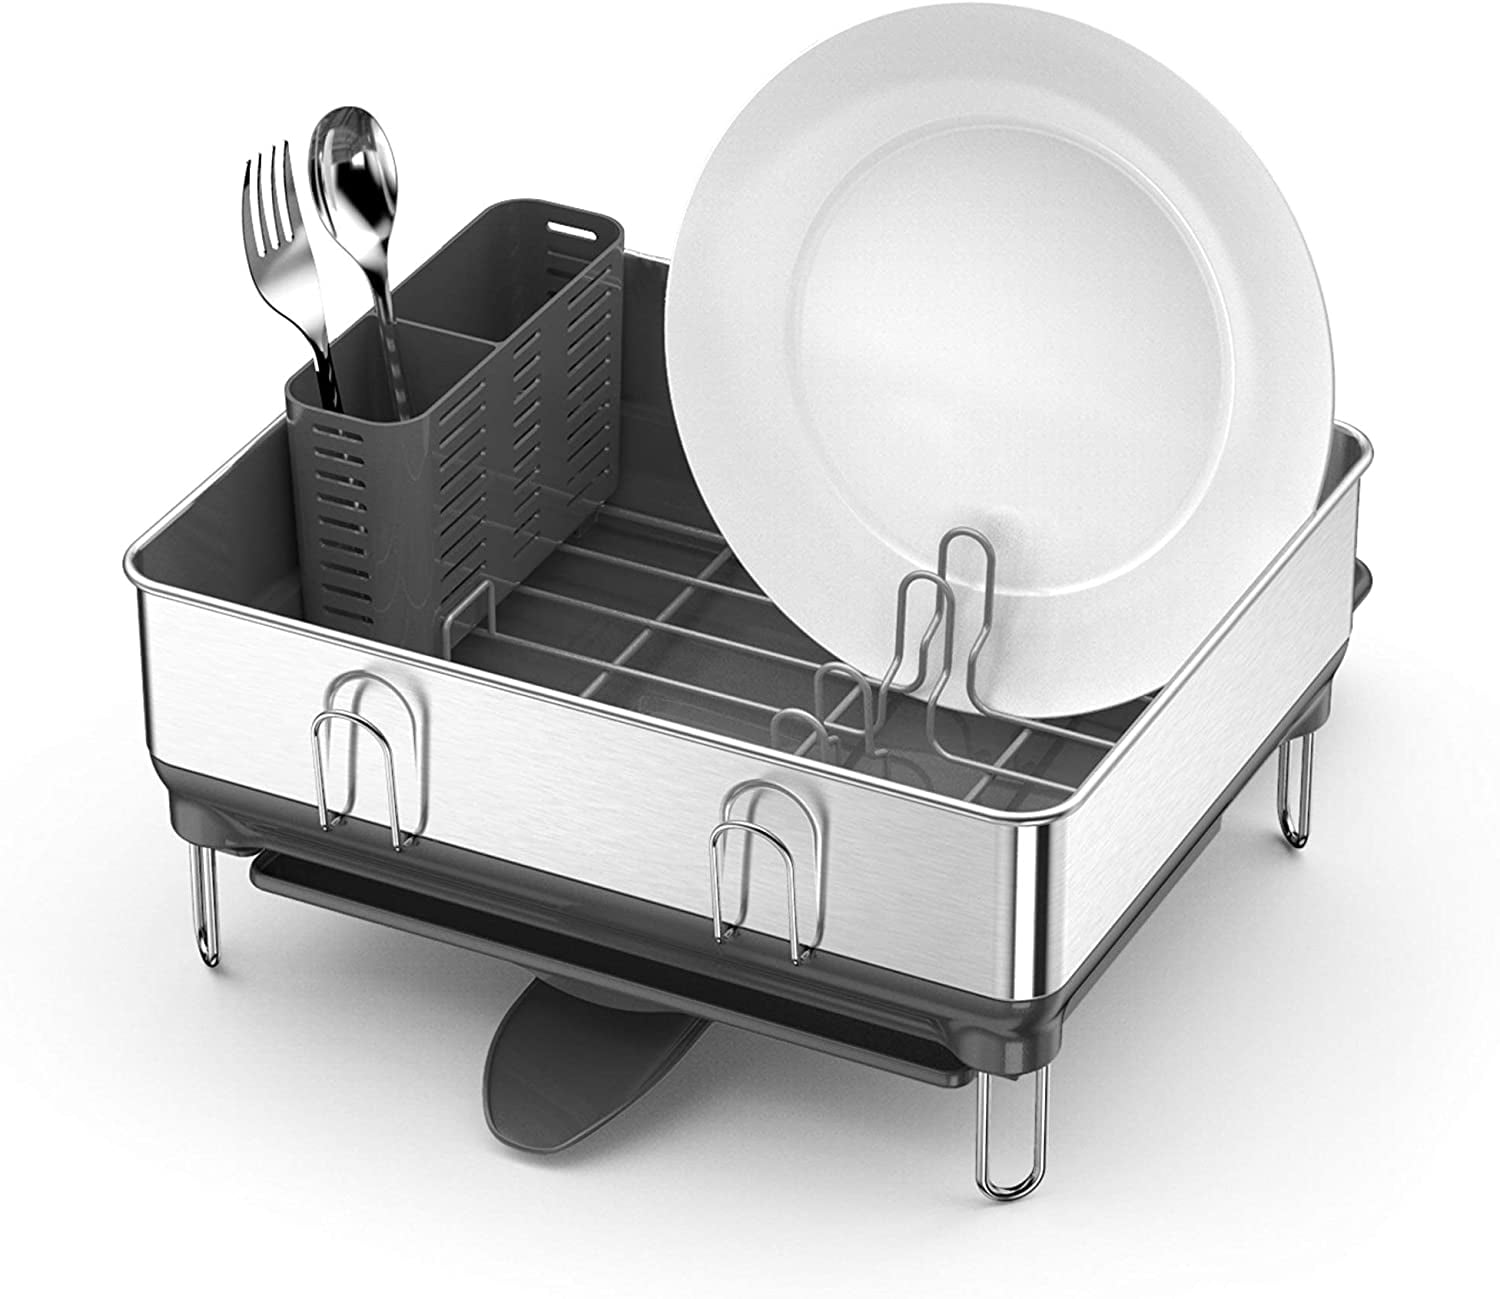 simplehuman Compact Kitchen Dish Drying Rack with Swivel Spout,  Fingerprint-Proof Stainless Steel Frame & Reviews